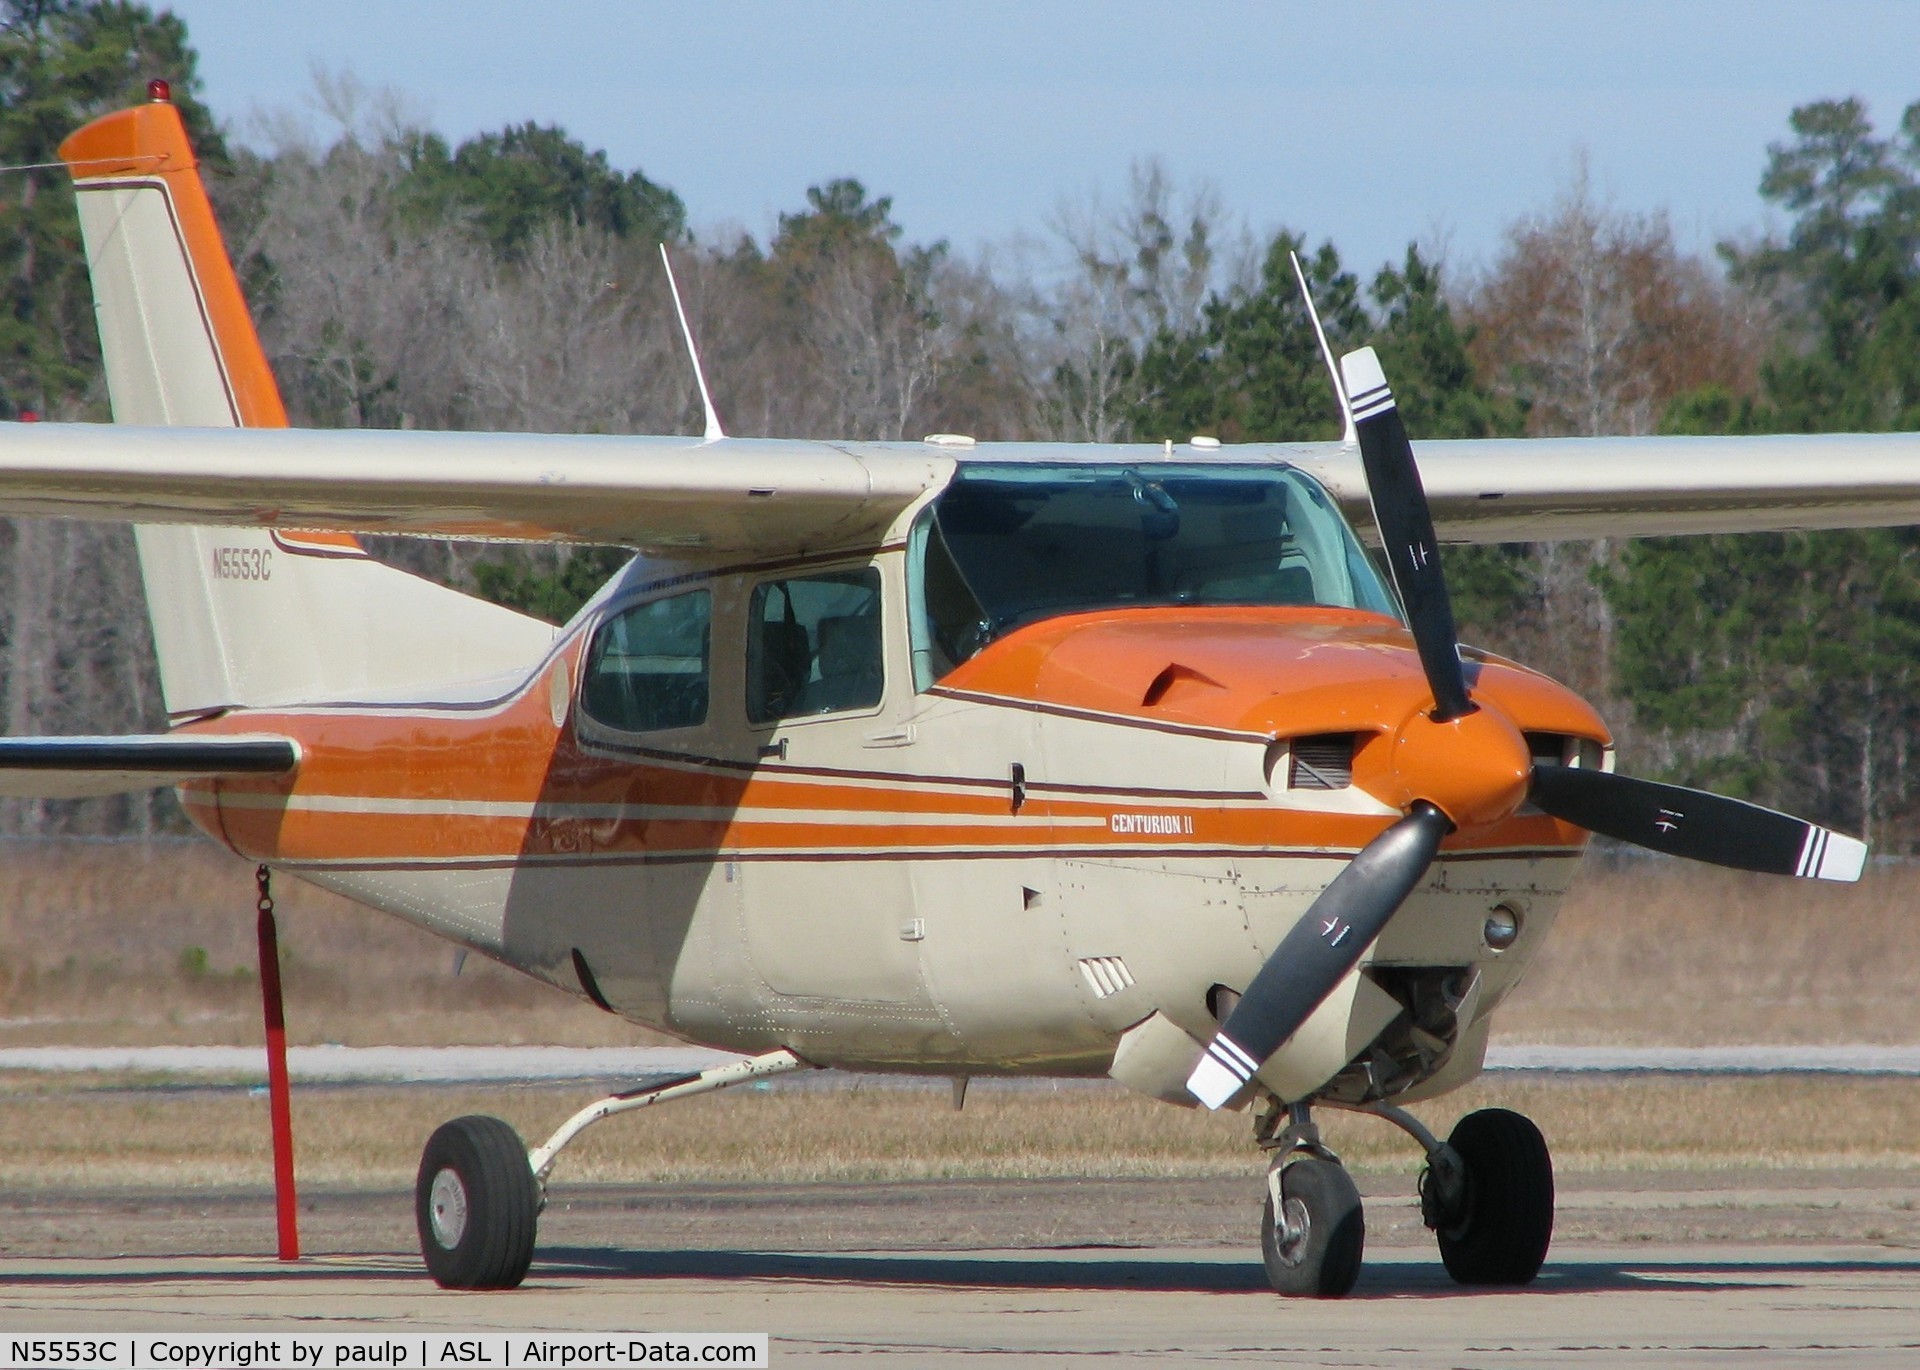 N5553C, 1979 Cessna T210N Turbo Centurion C/N 21063791, Parked at the Marshall/Harrison County Texas airport.